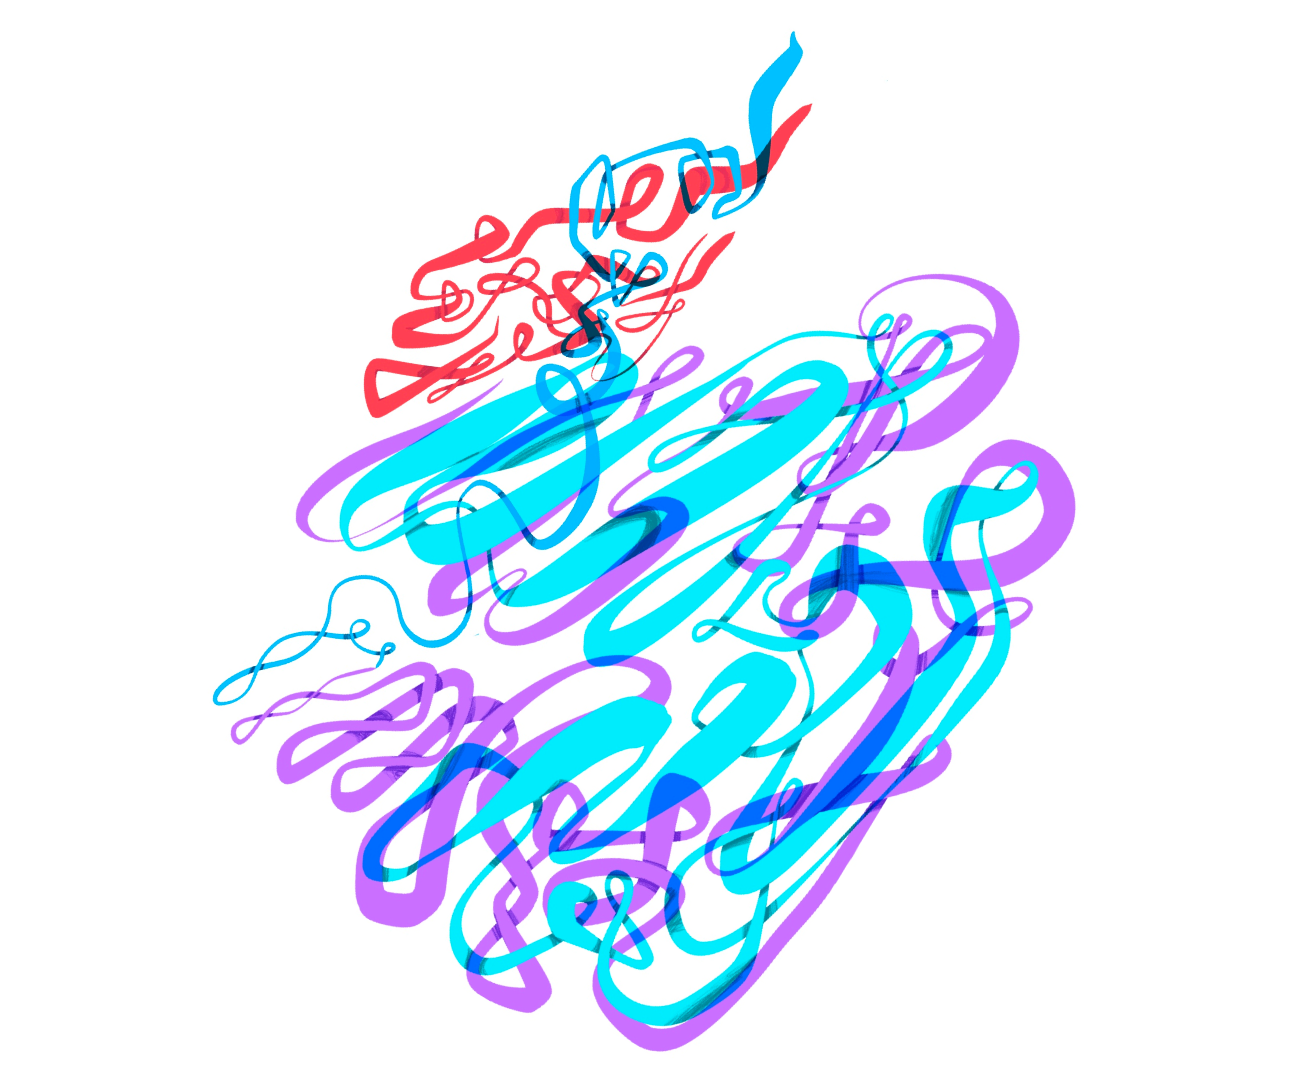 back and forth, ribbons shoot and layer ontop of one another, purple, cyan, red, and sky blue